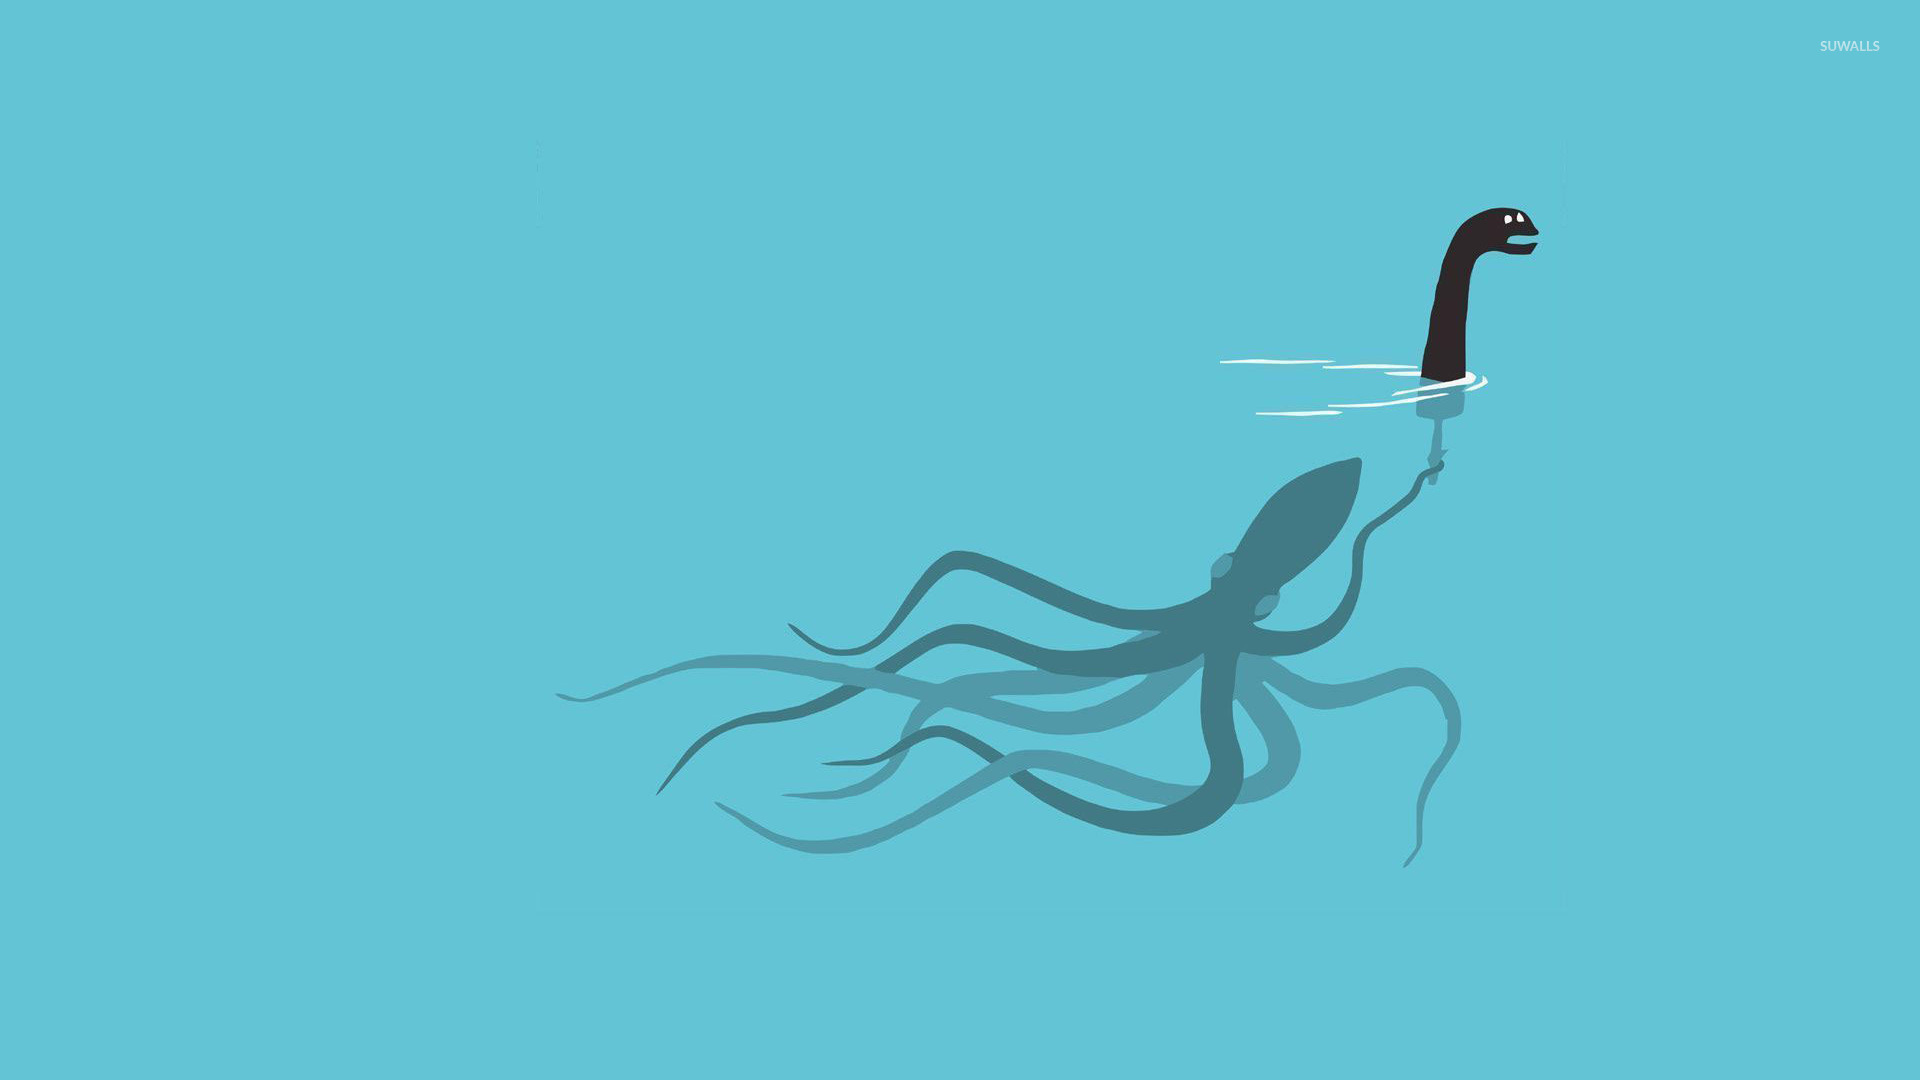 Giant squid playing as the Loch Ness Monster wallpaper   Funny 1920x1080